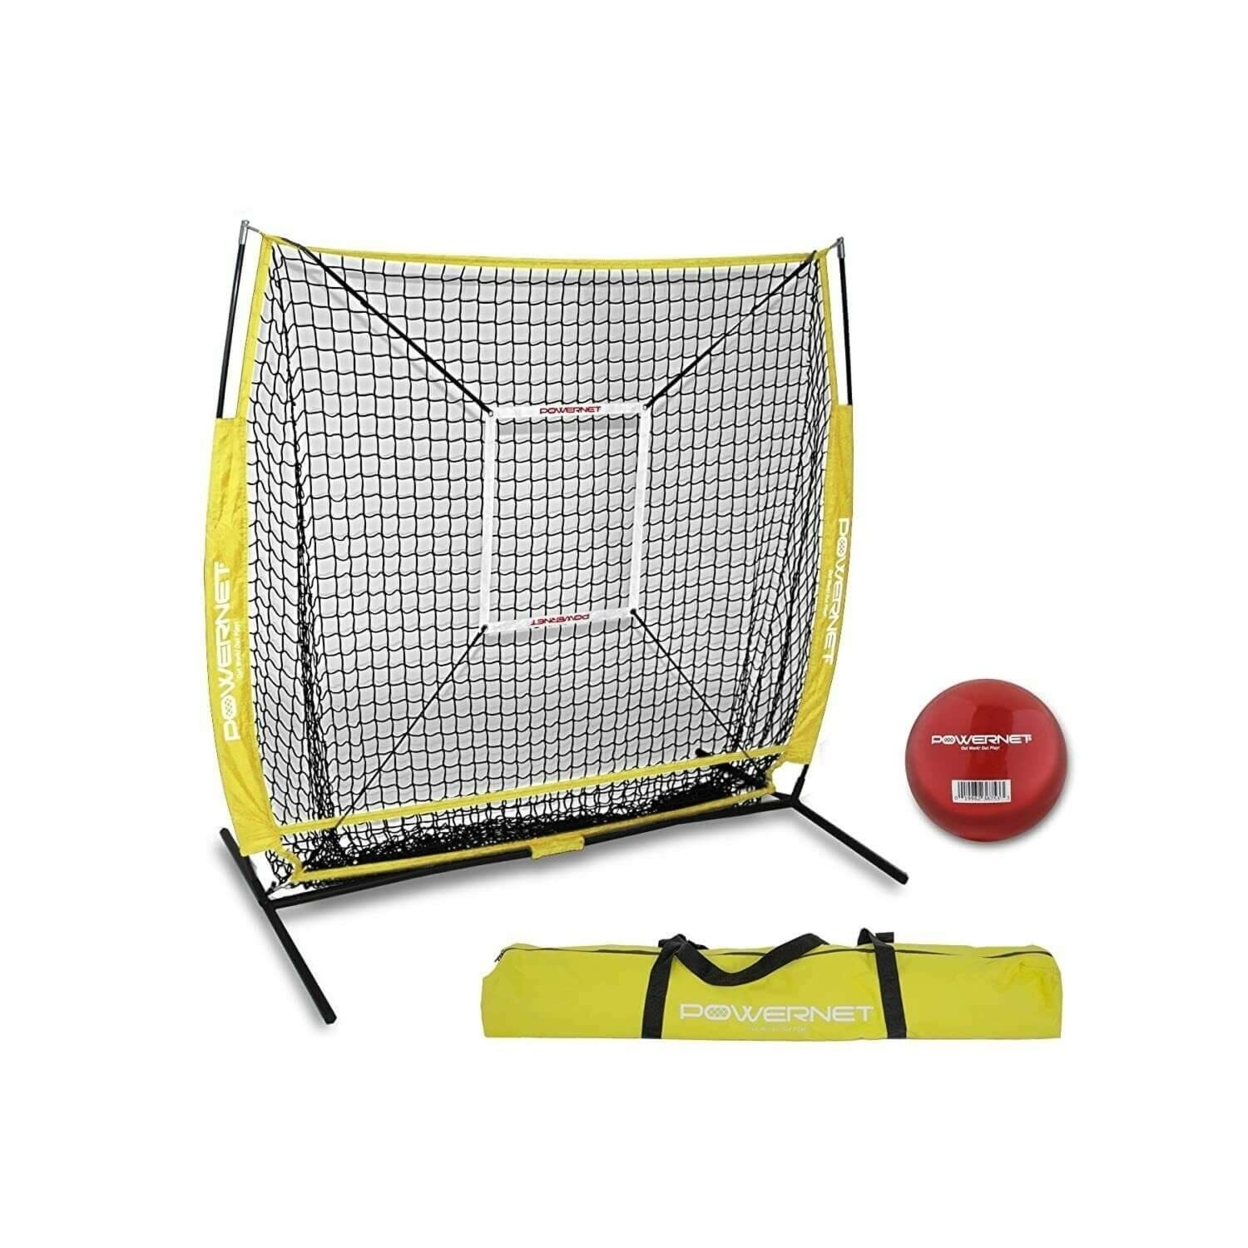 PowerNet 5x5 Practice Hitting Pitching Net + Strike Zone Attachment + Weighted Training Ball Bundle + Carry Bag - Navy